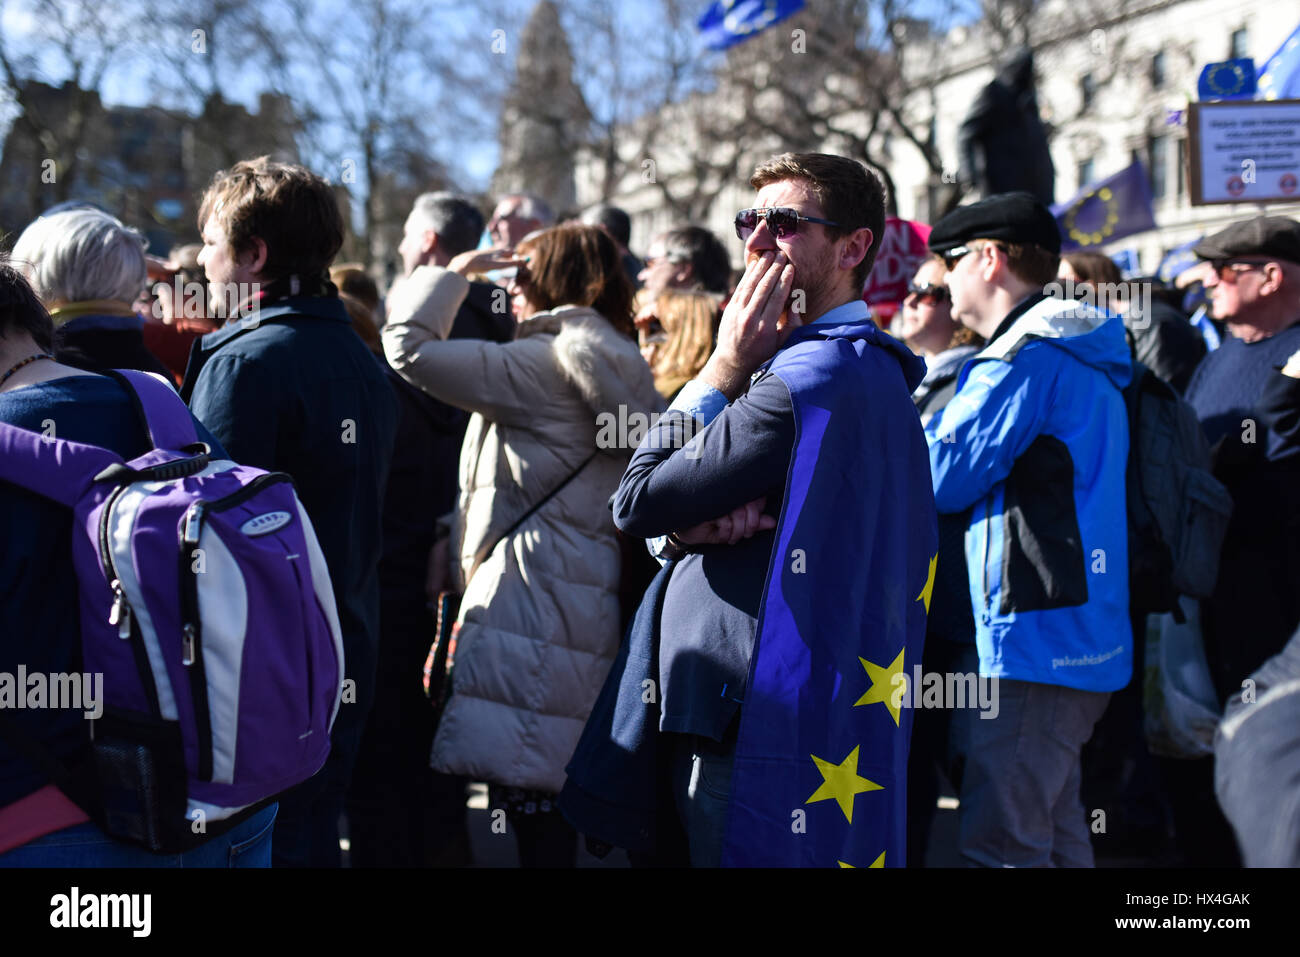 London, UK. 25th Mar, 2017. A pro-EU protester listens to speeches in Parliament Square, following the March for Europe. Thousands marched from Park Lane to Parliament Square to oppose Brexit and support the European Union. Credit: Jacob Sacks-Jones/Alamy Live News. Stock Photo